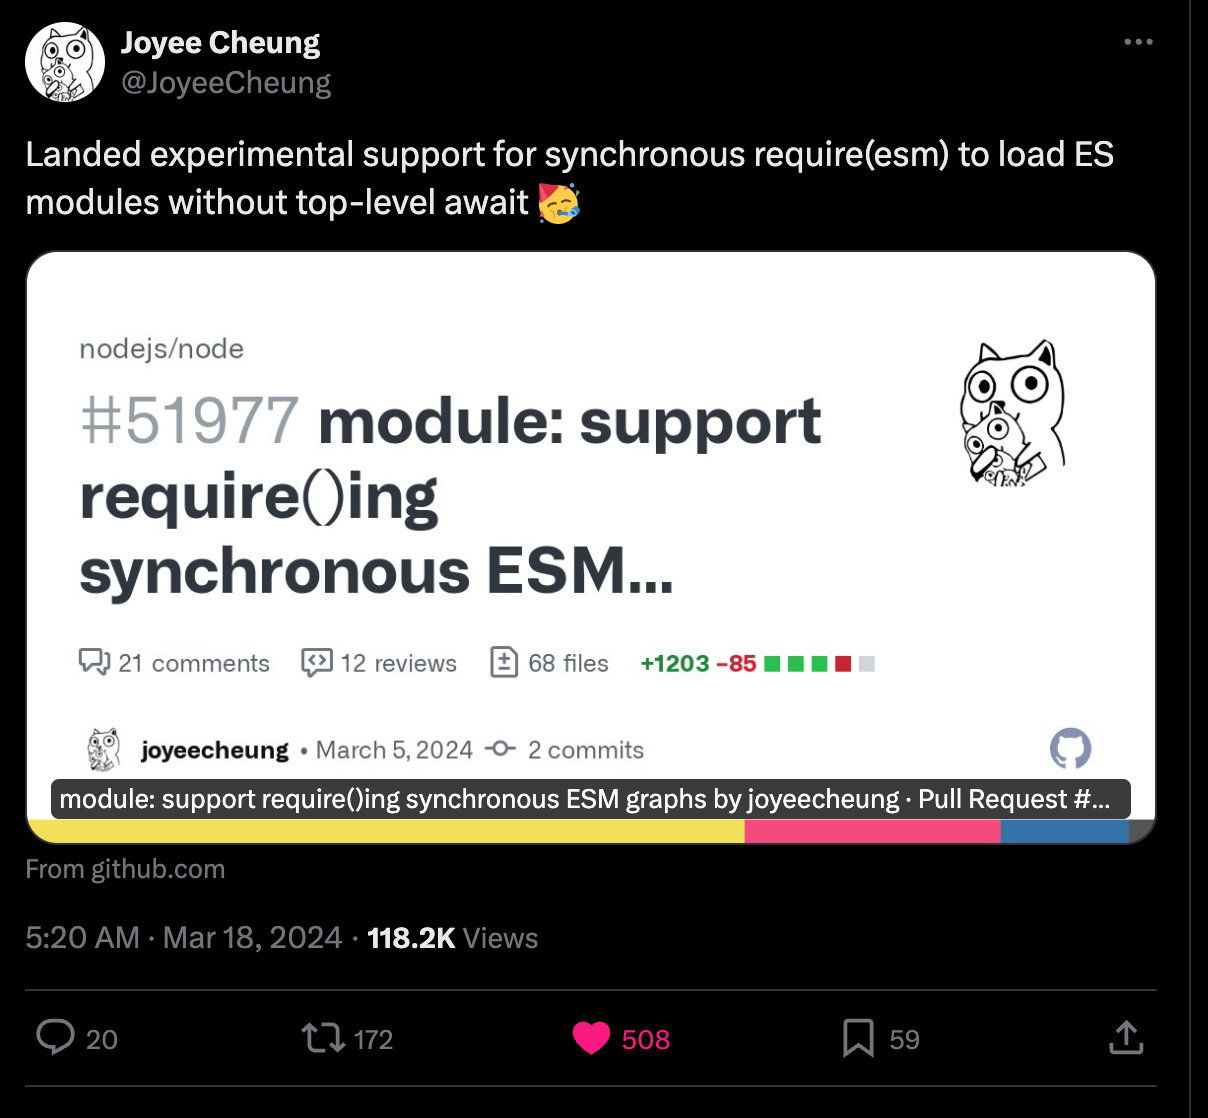 Enhancing Node.js Core: Introducing Support for Synchronous ESM Graphs